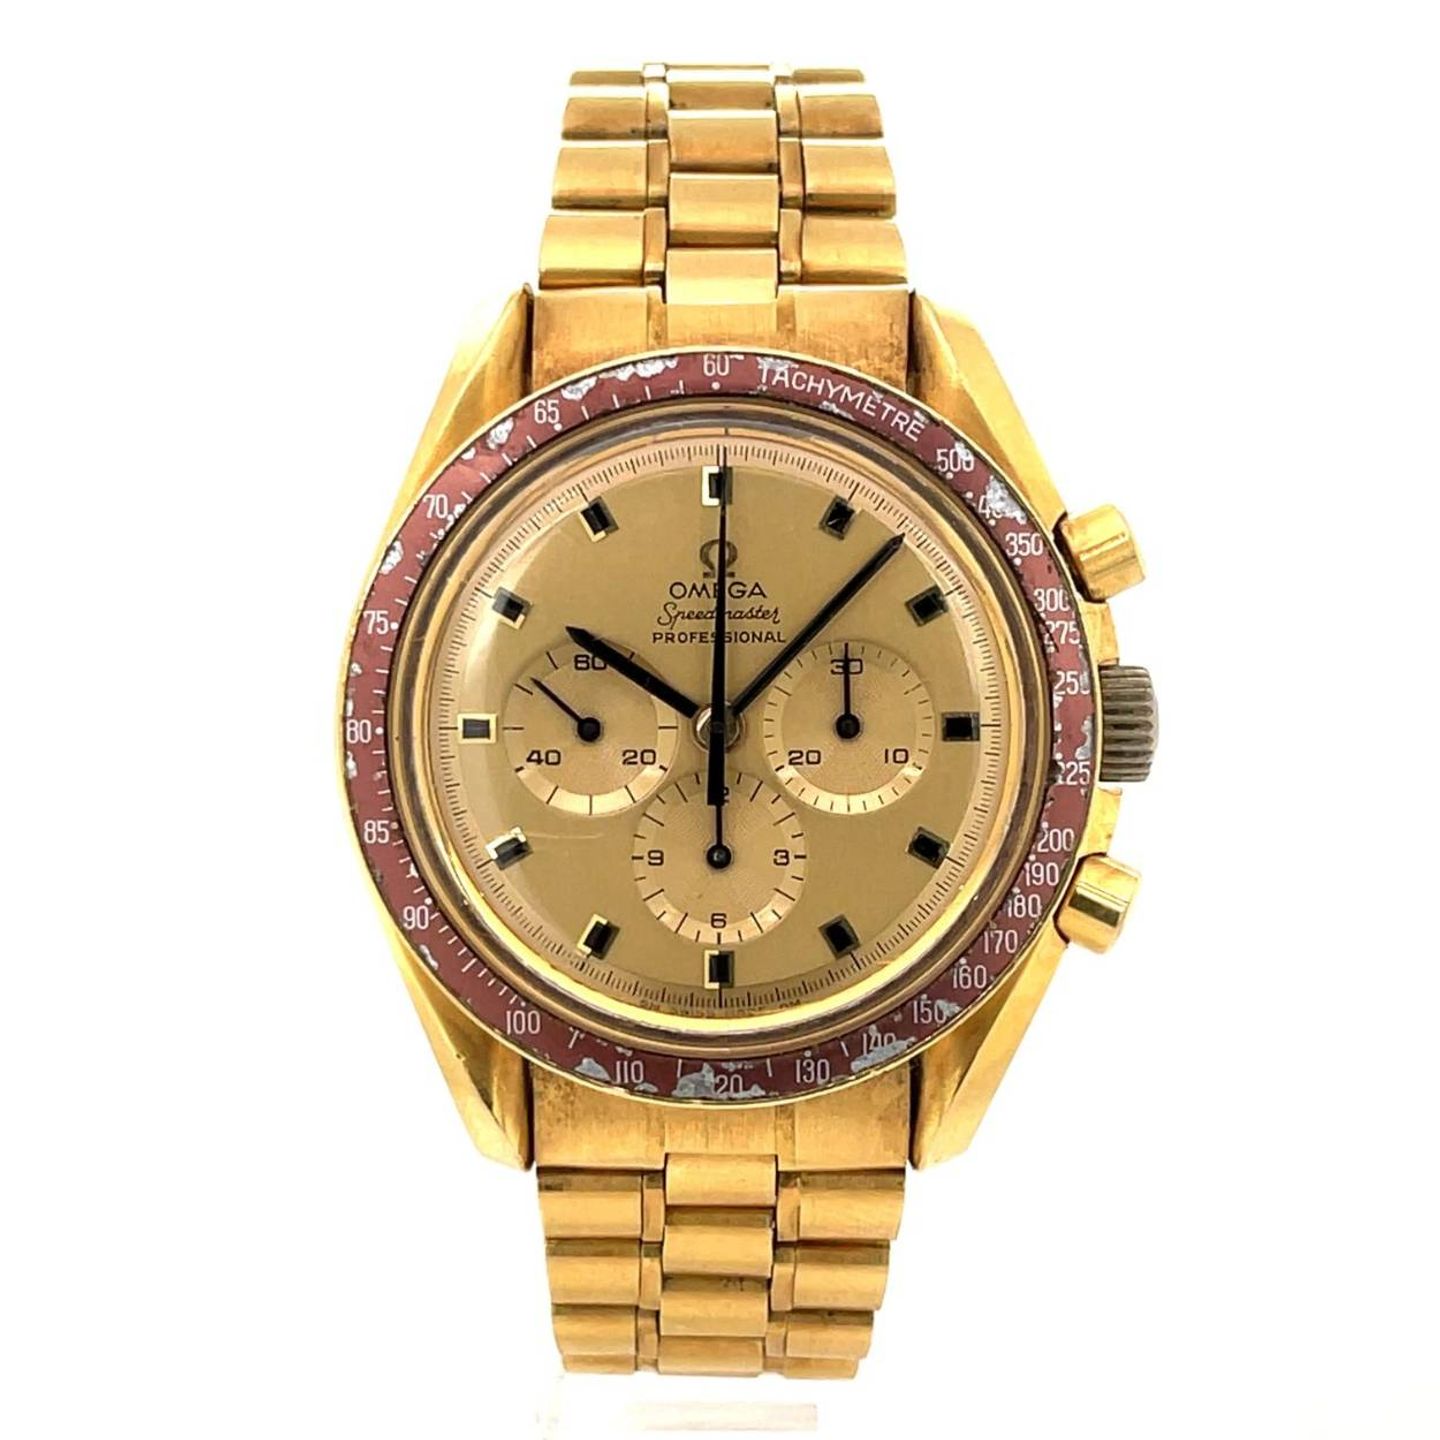 Omega Speedmaster Professional Moonwatch 145.022 (Unknown (random serial)) - Gold dial 42 mm Yellow Gold case (1/5)